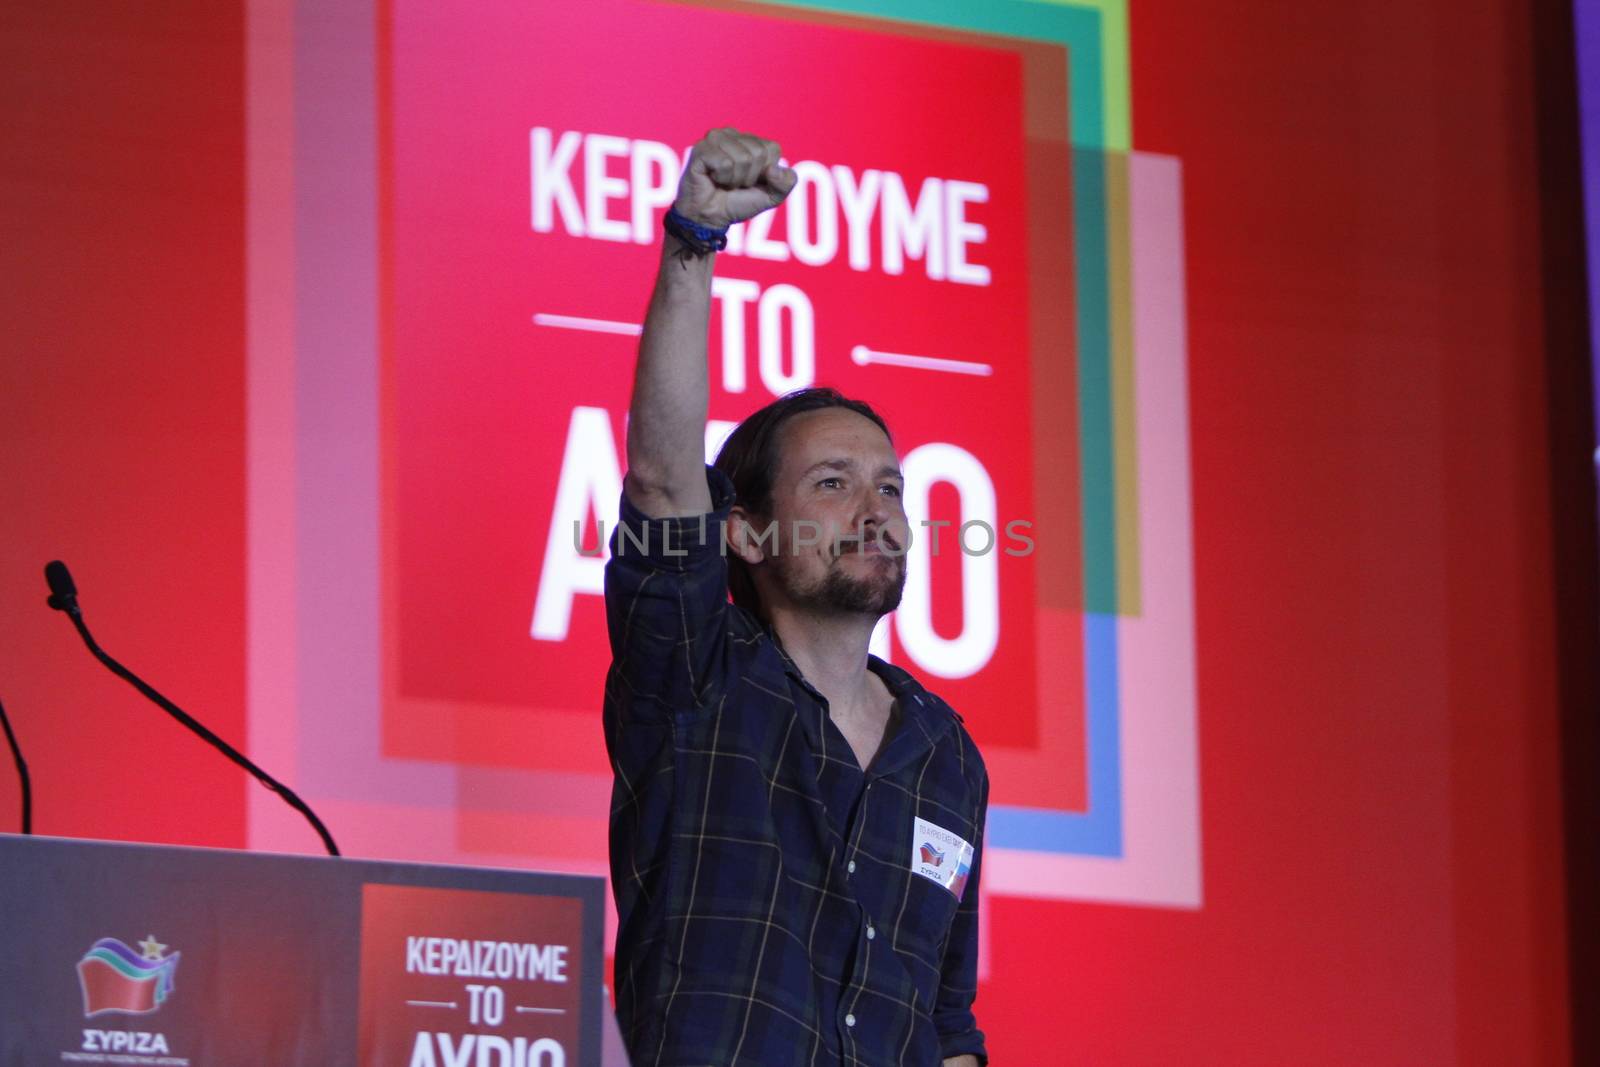 GREECE, Athens: Pablo Iglesias, the leader of the Spanish anti-austerity Podemos party, makes a clenched fist salute to Syriza supporters during the party's final election rally at Syntagma Square, Athens on September 18, 2015 two days ahead of the Greek General Election